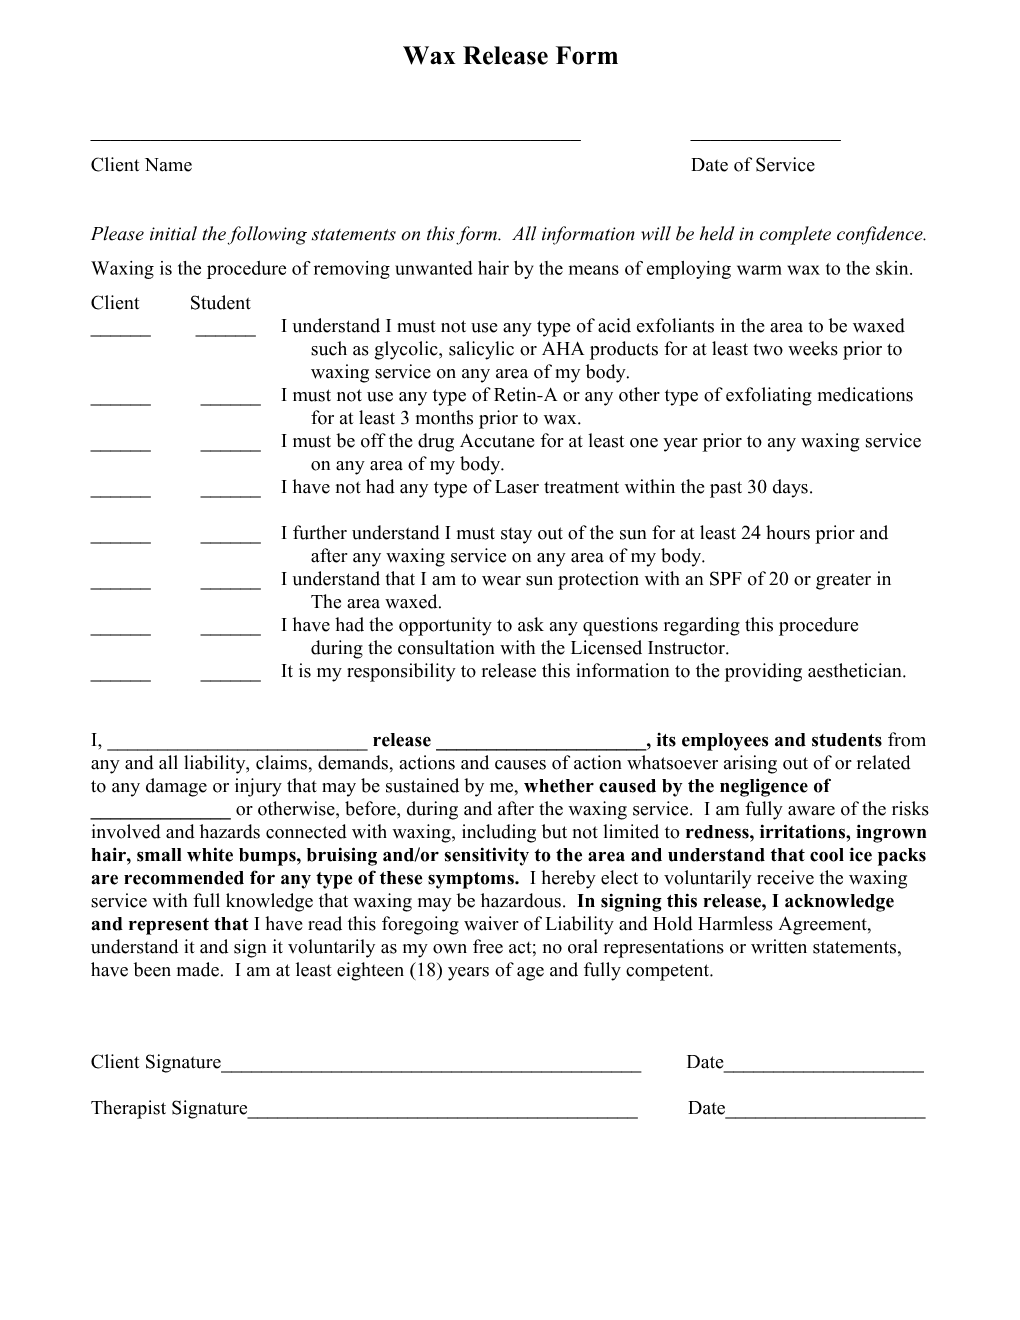 Wax Release Form